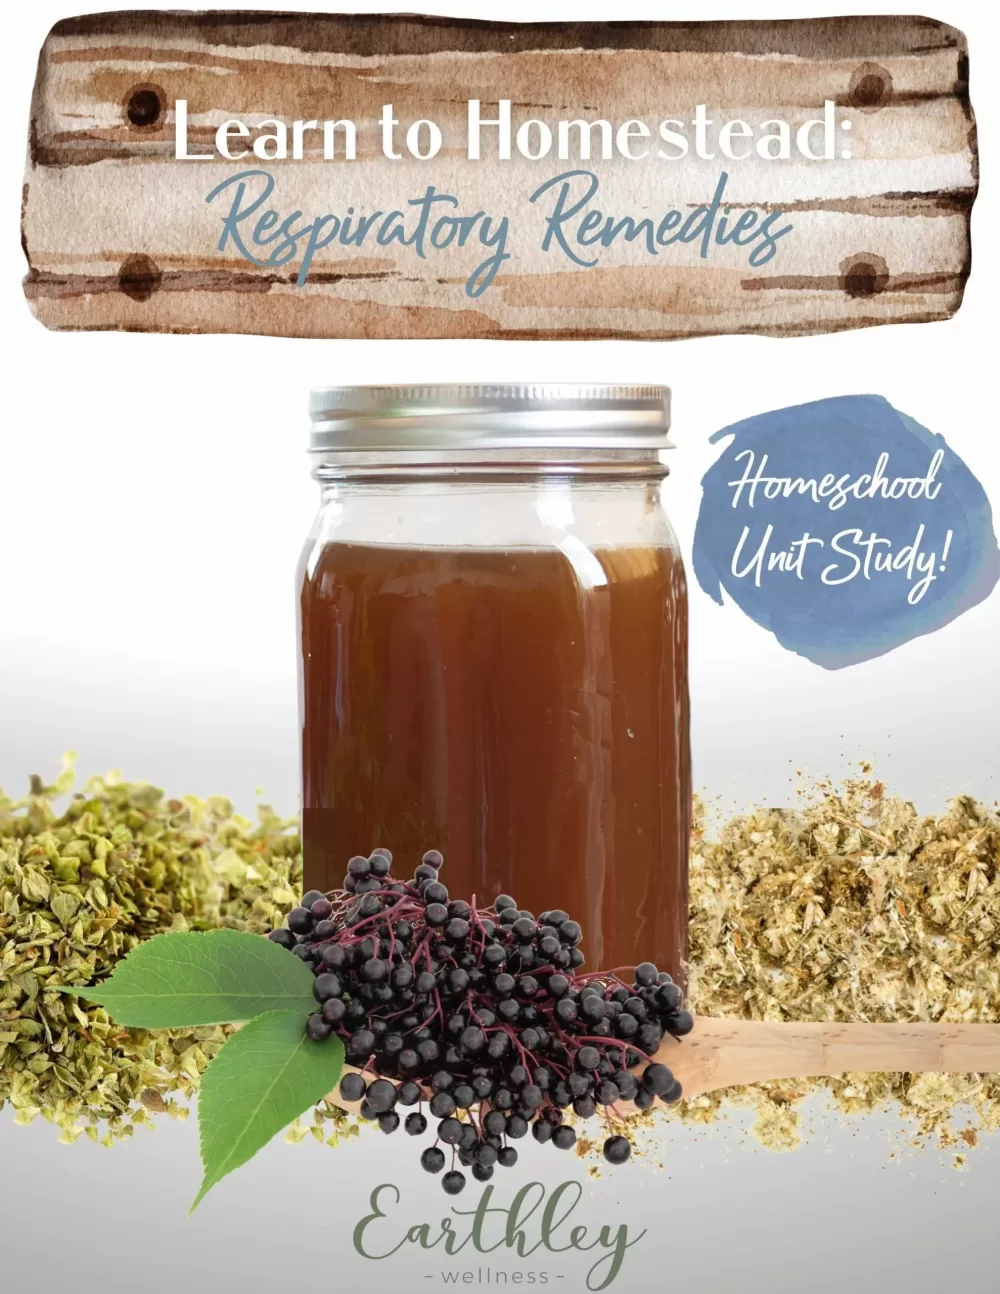 Learn to Homestead Respiratory Remedies